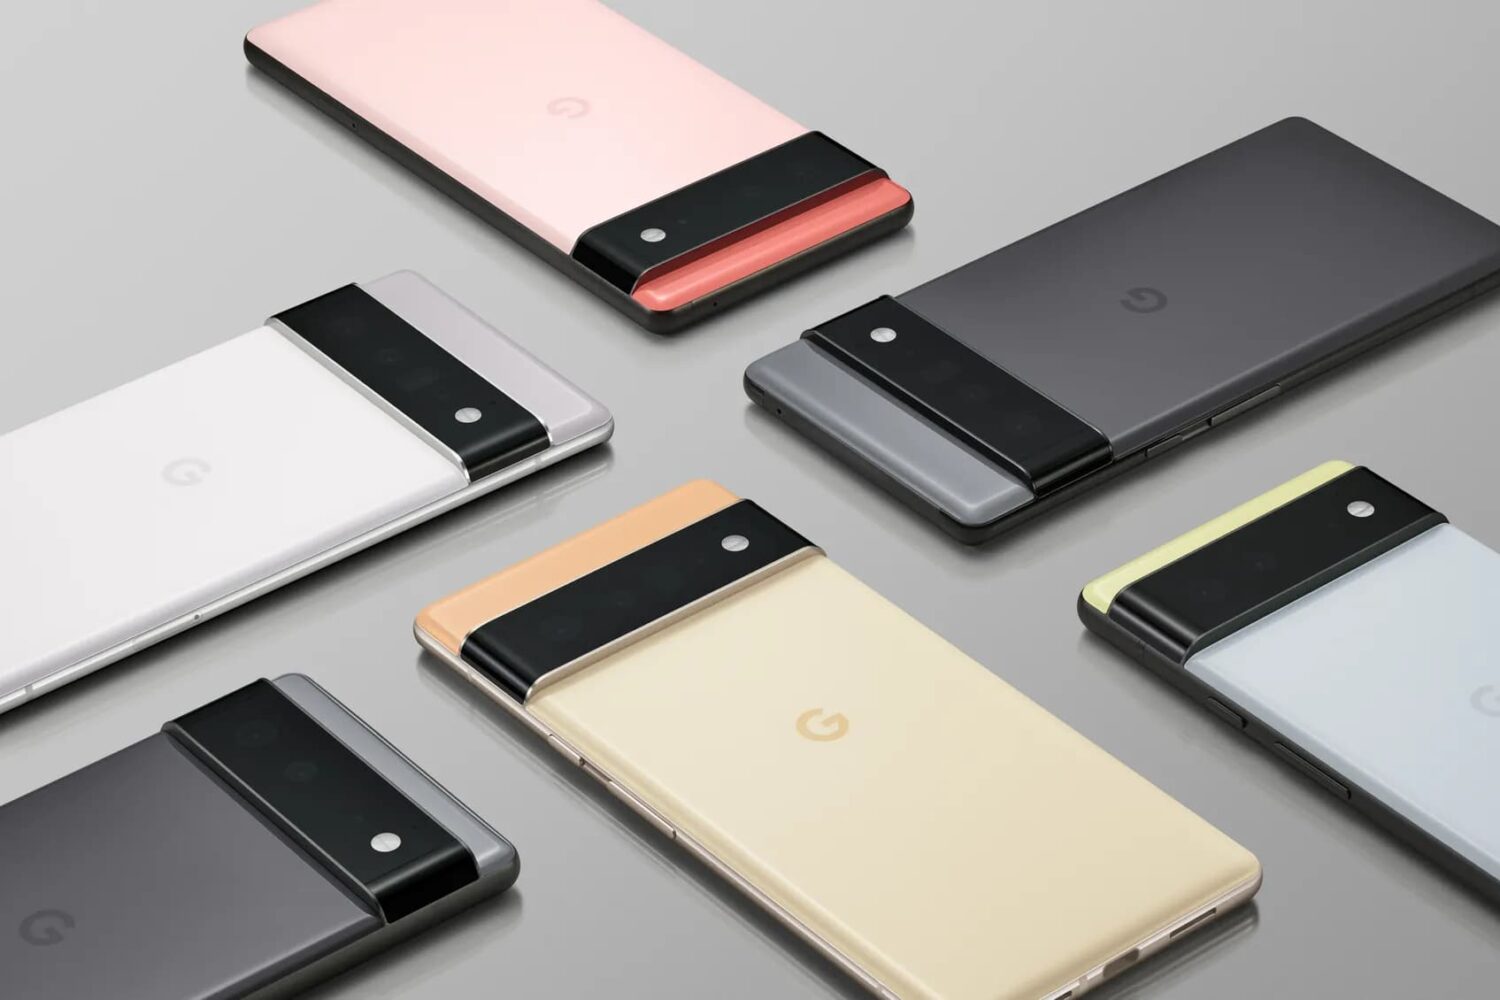 Promotional graphics showcasing Google Pixel 6 and Pixel 6 Pro smartphone lineup